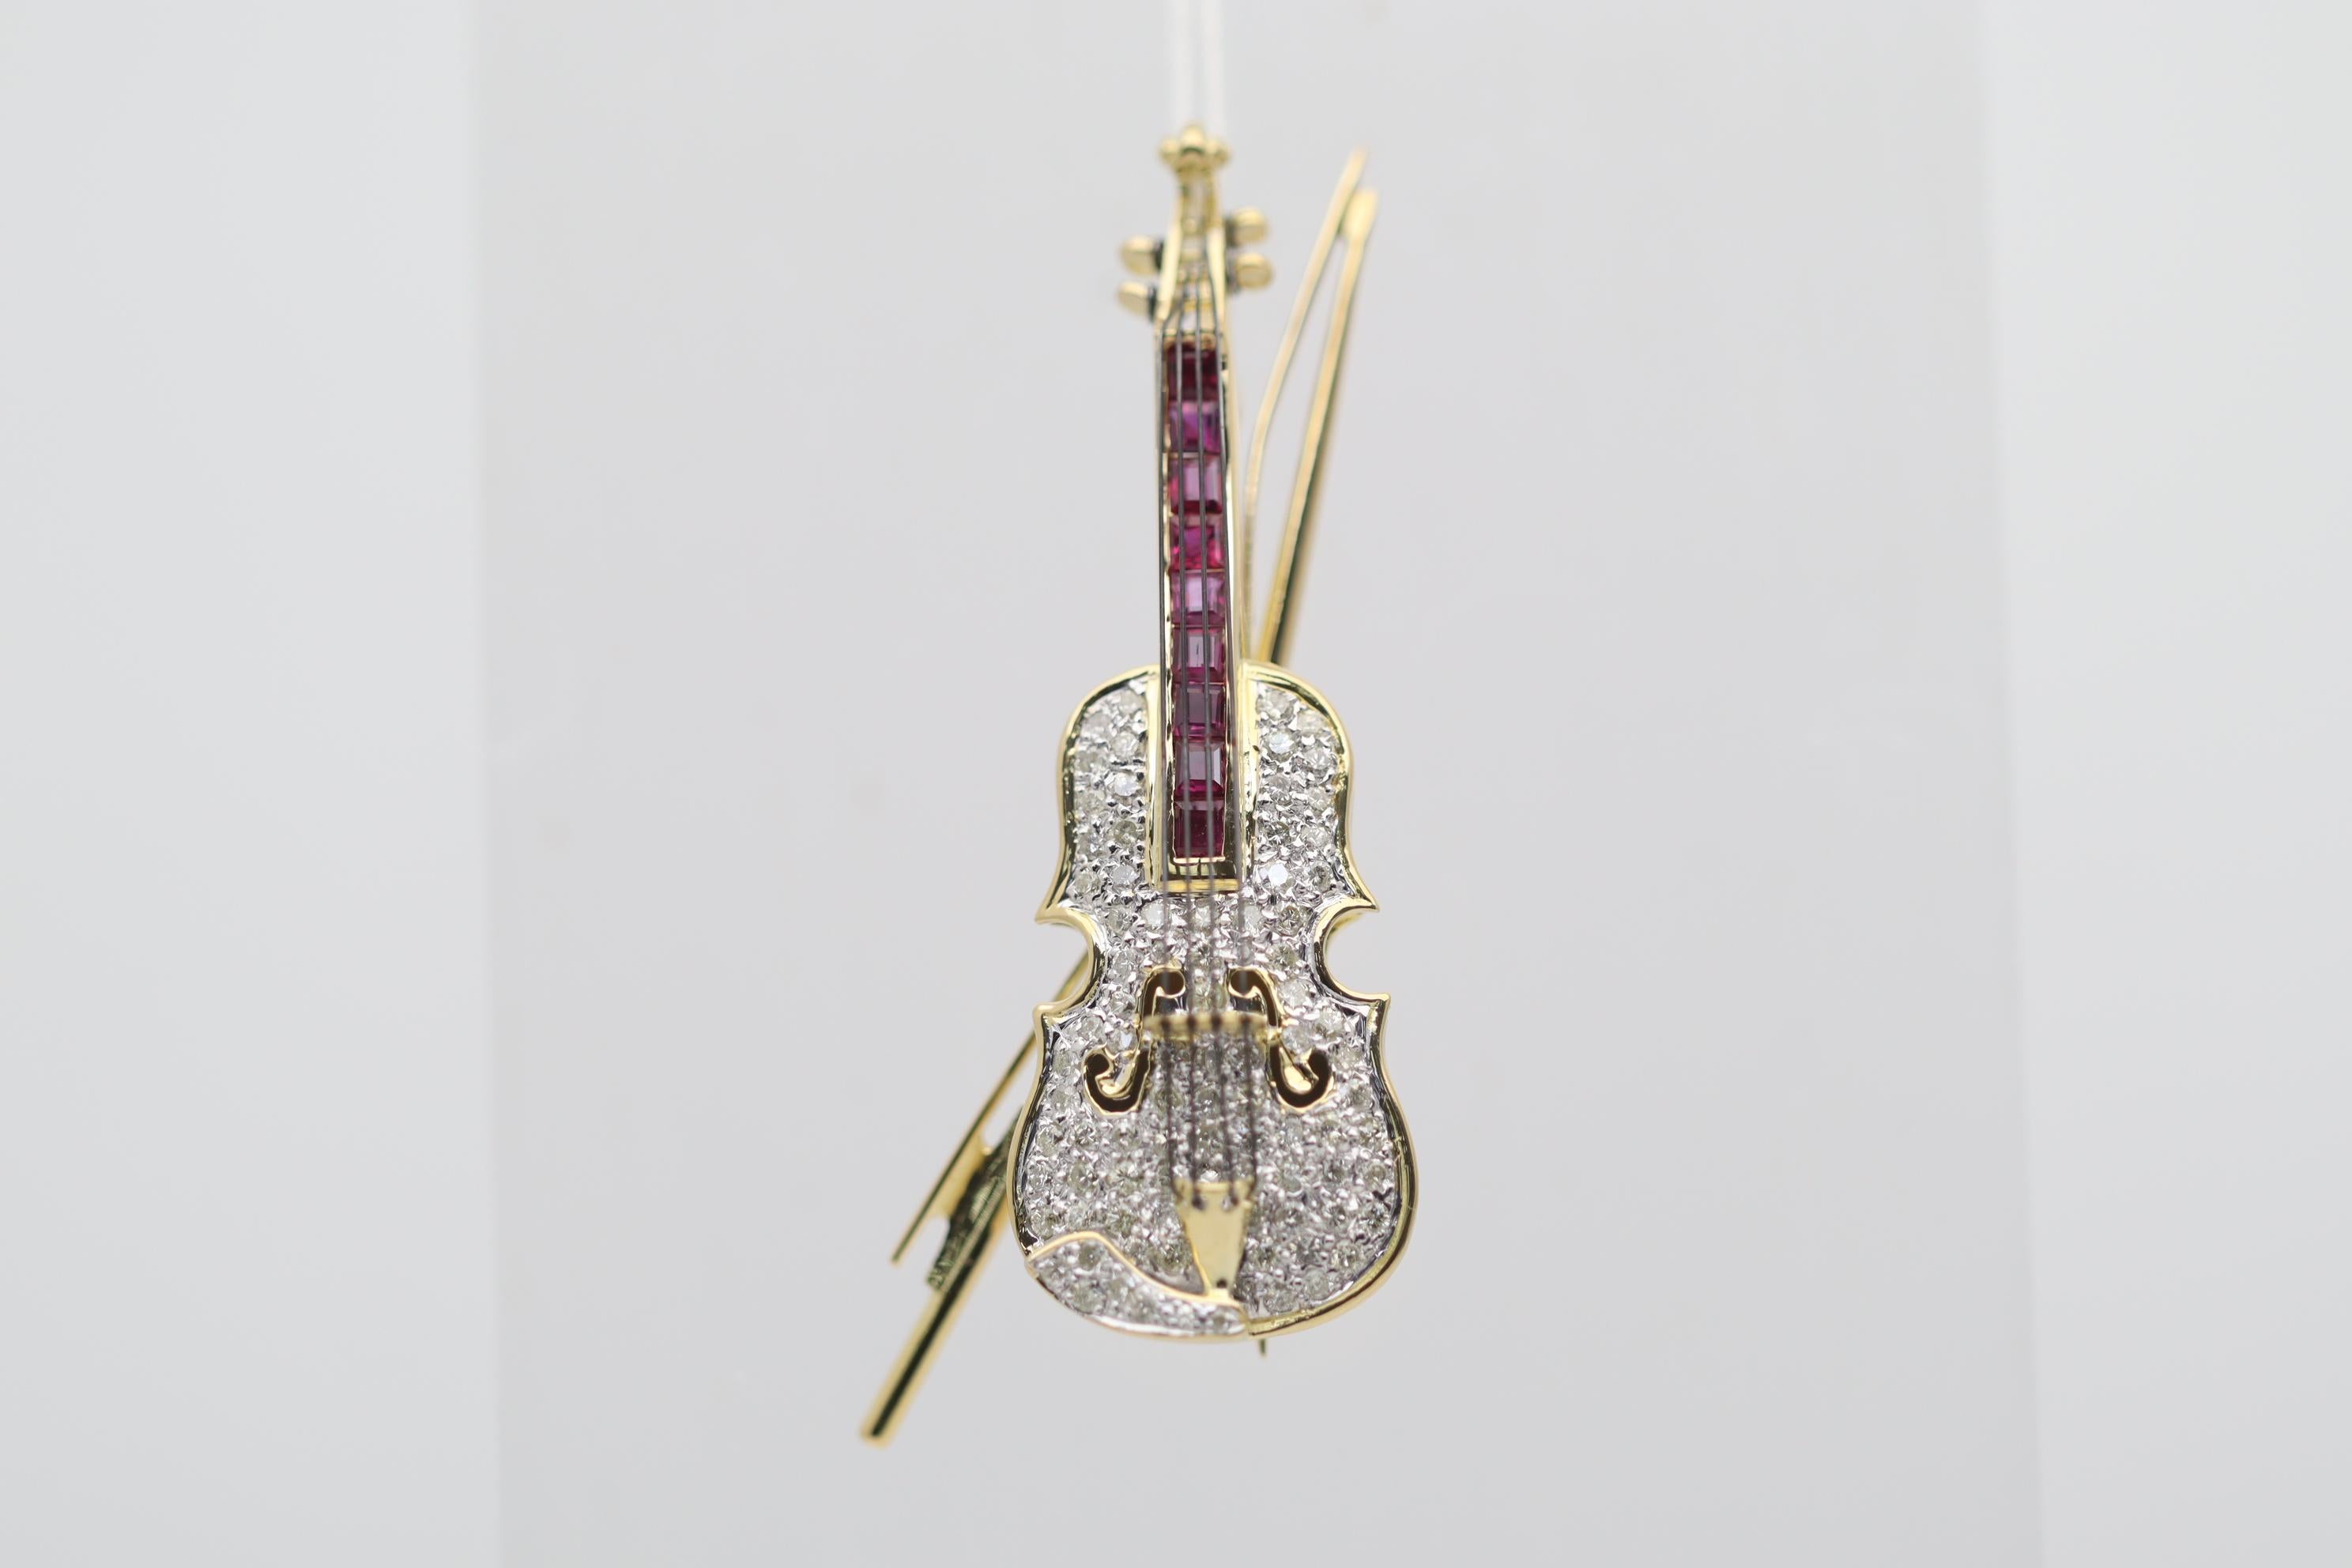 A diamond and ruby studded gold violin! It features 1.19 carats of round brilliant-cut diamonds along with 0.80 carats of square-cut rubies channel set under the violin’s strings. Made in 18k yellow gold and ready to be worn as a brooch or add a